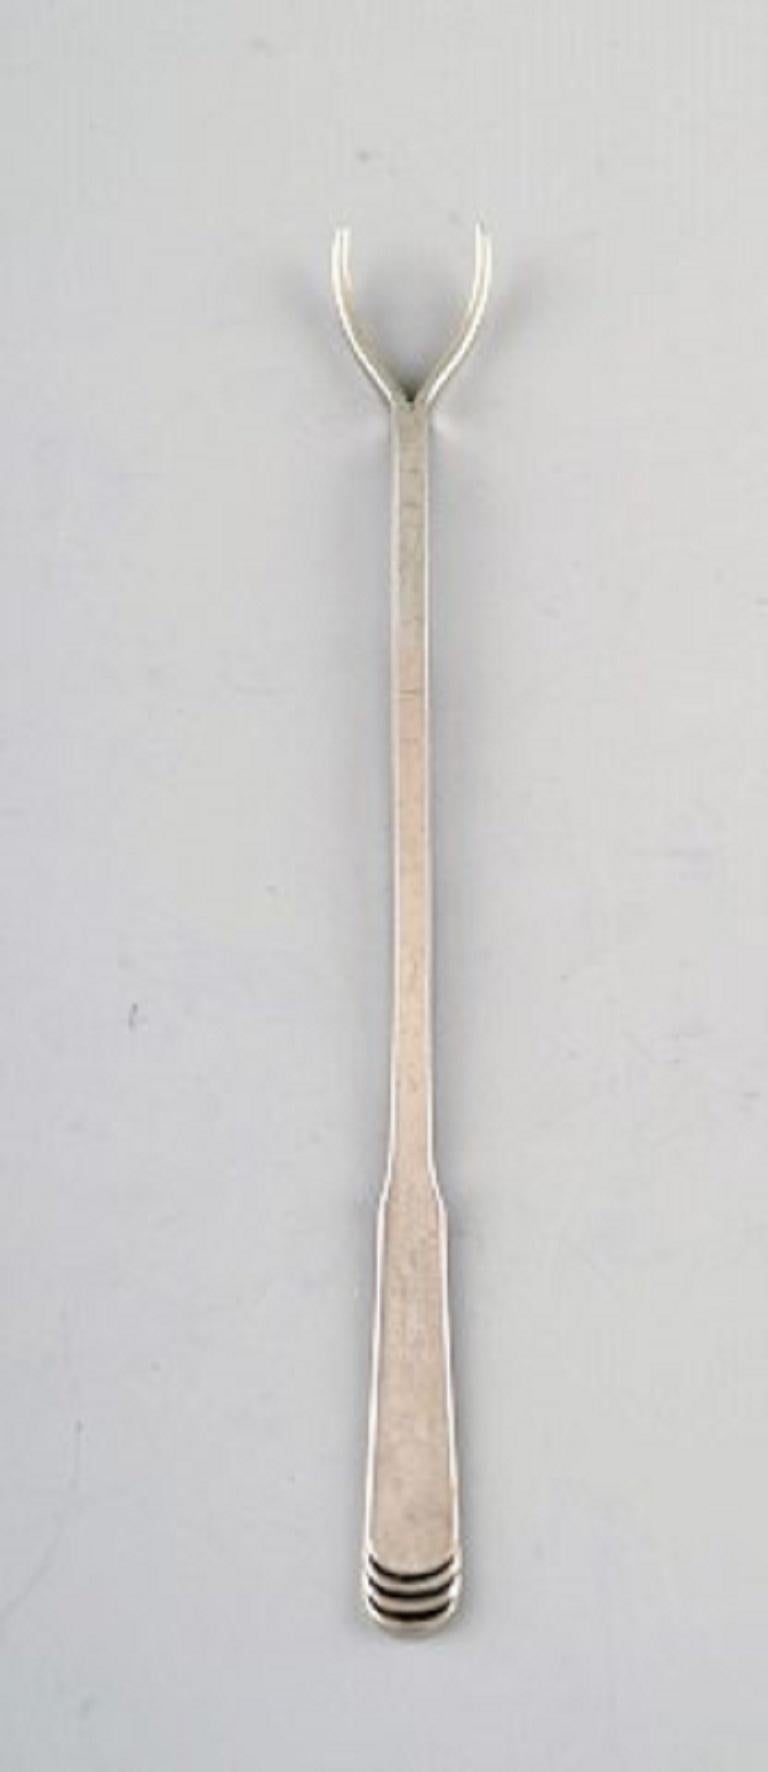 Hans Hansen silverware number 15. A set of six cocktail picks / nut picks in silver, 1930s-1940s.
Measures: 11.5 cm.
In very good condition.
Stamped.